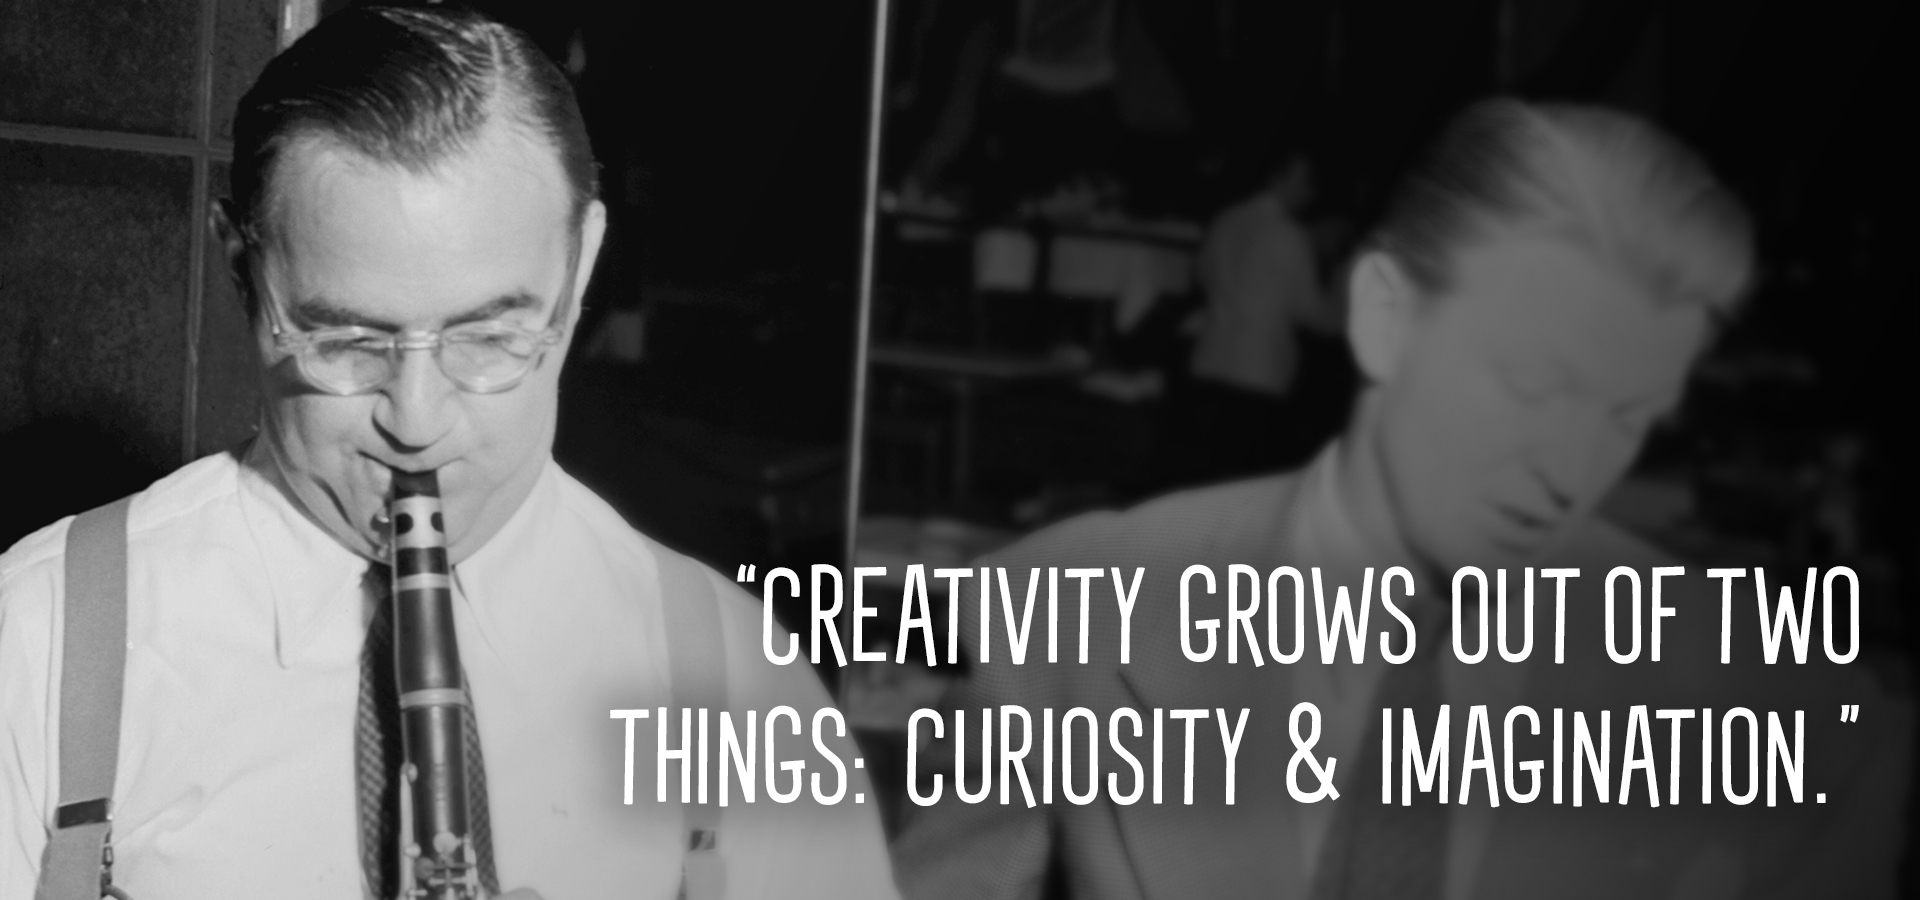 “Creativity grows out of two things: curiosity & imagination.”